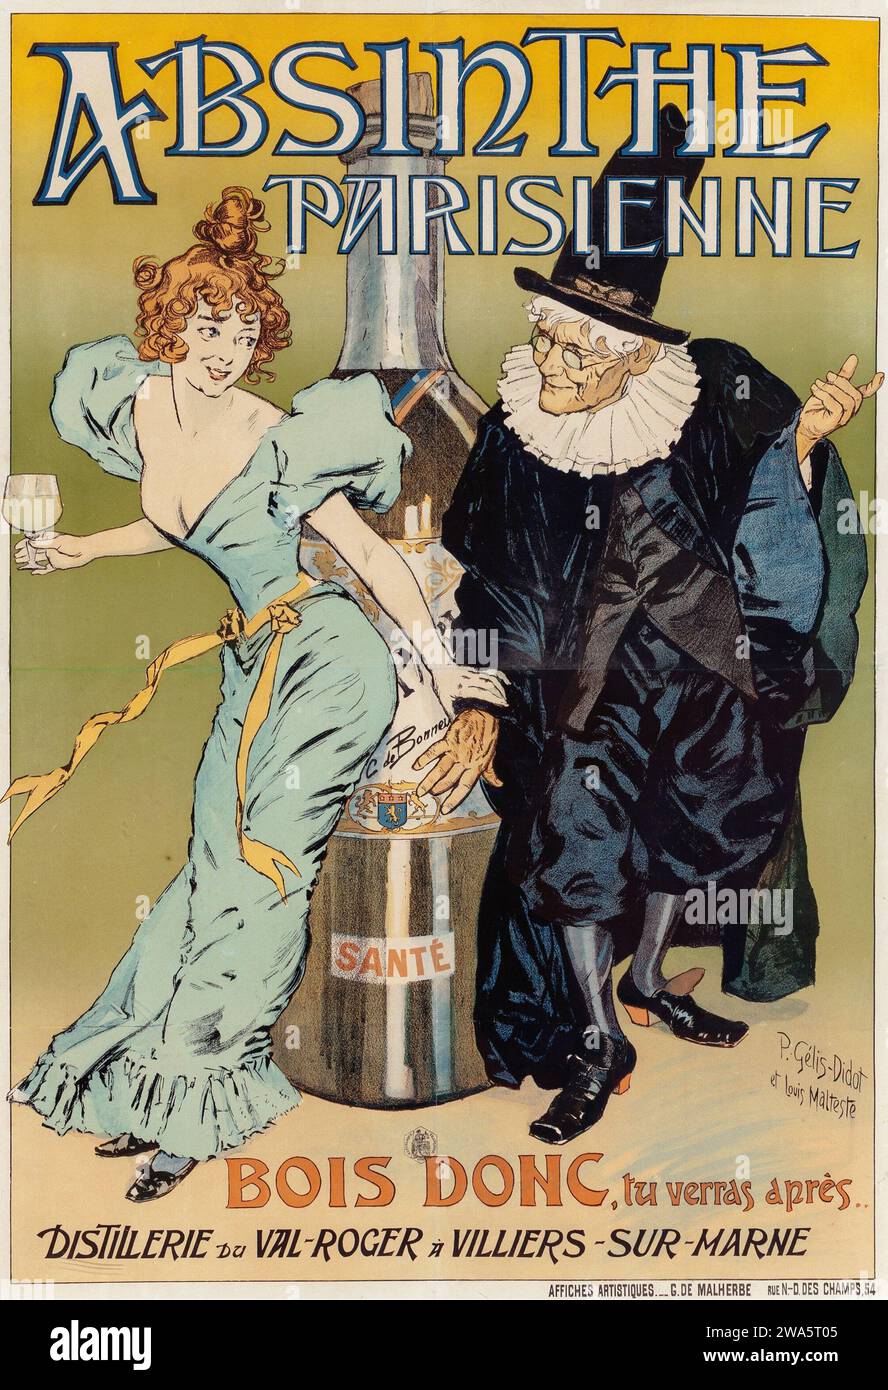 Absinthe Parisienne, 1894 - Vintage alcohol advertisement - P. GELIS-DIDOT artwork (French, 19th century) and LOUIS MALTESE (French). Stock Photo